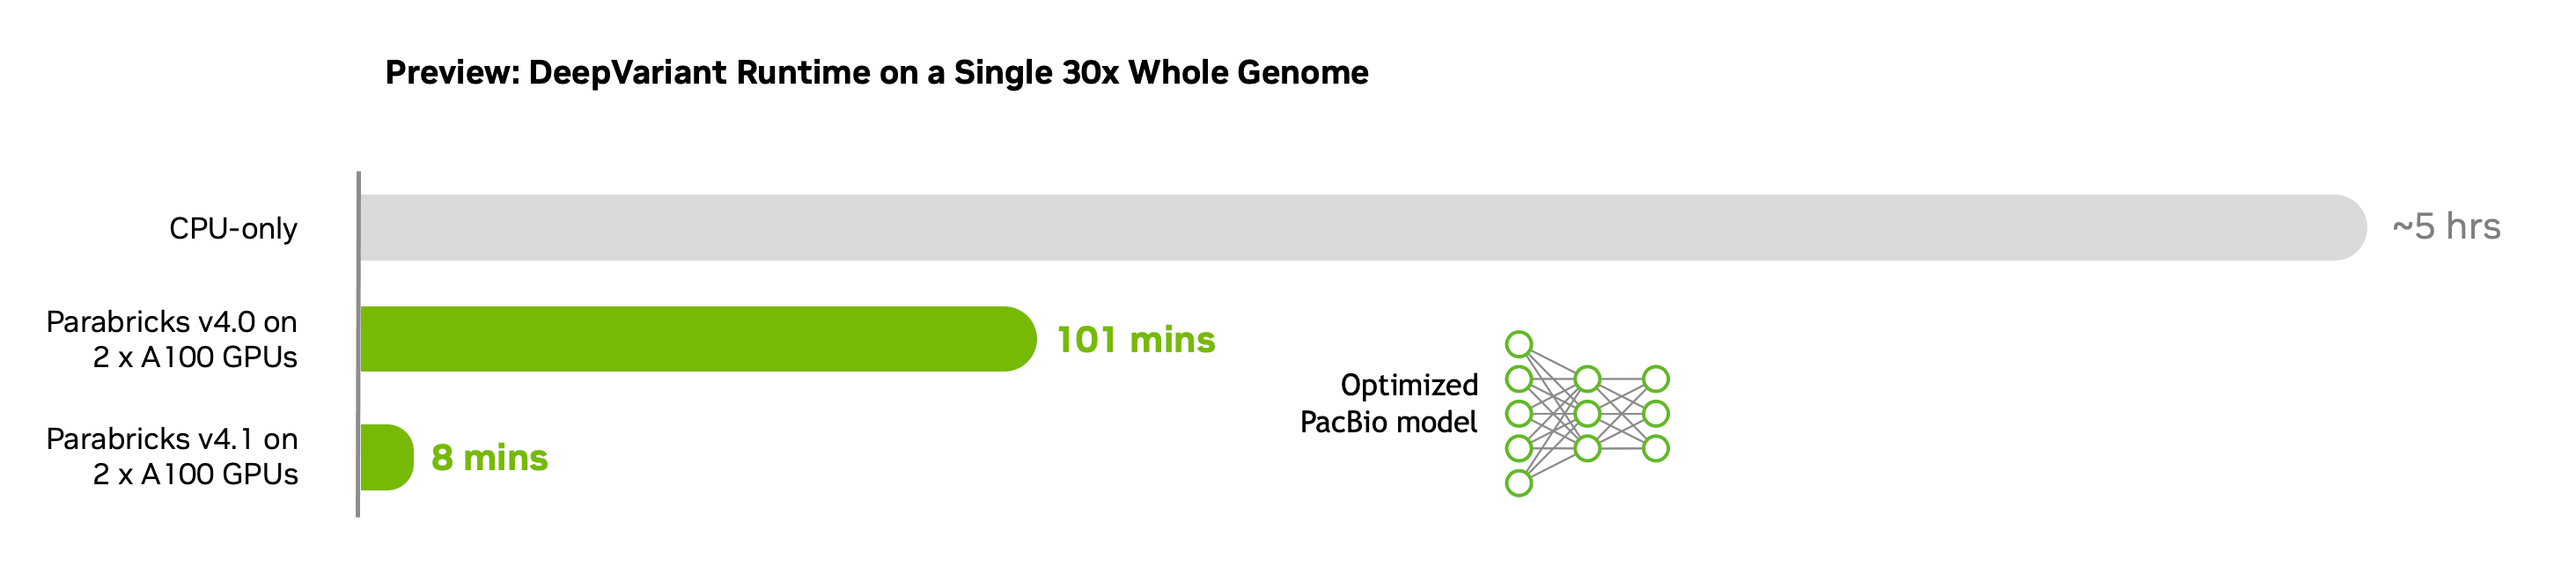 Chart showing benchmarks for DeepVariant runtime on a single 30x whole genome, which is now 8 minutes with Parabricks 4.1 on DGX Station.